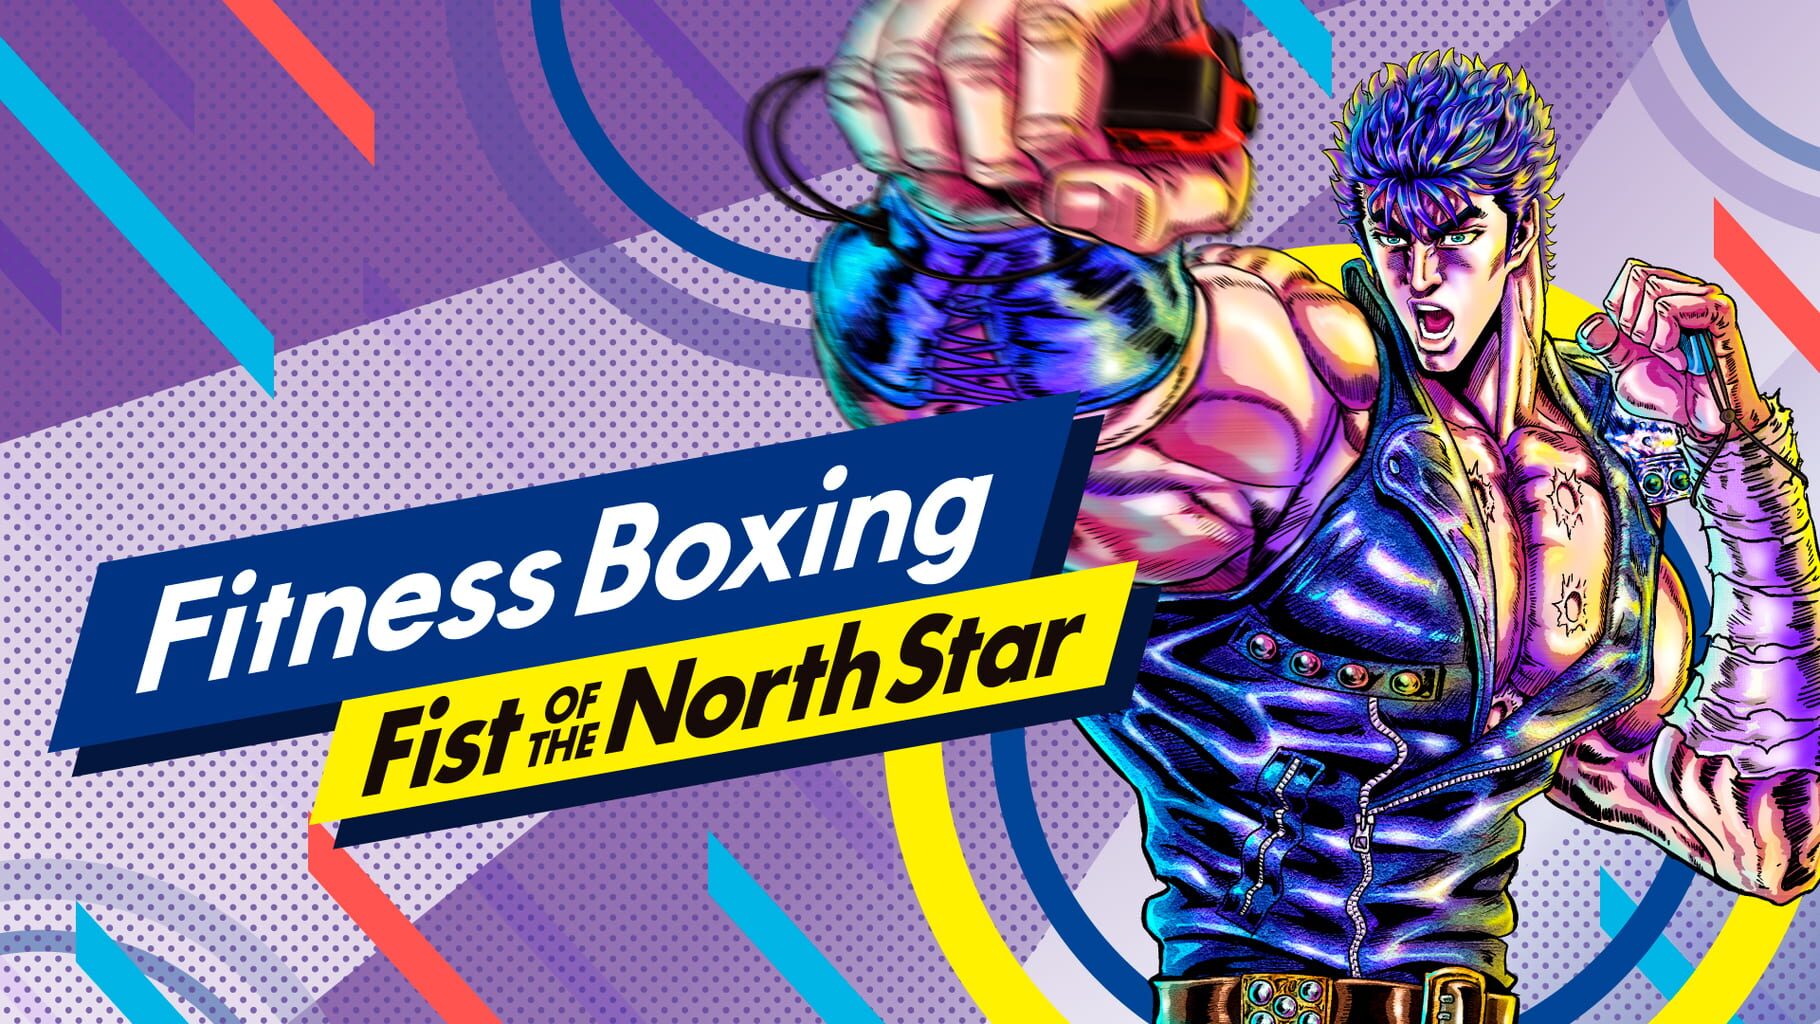 Arte - Fitness Boxing Fist of the North Star